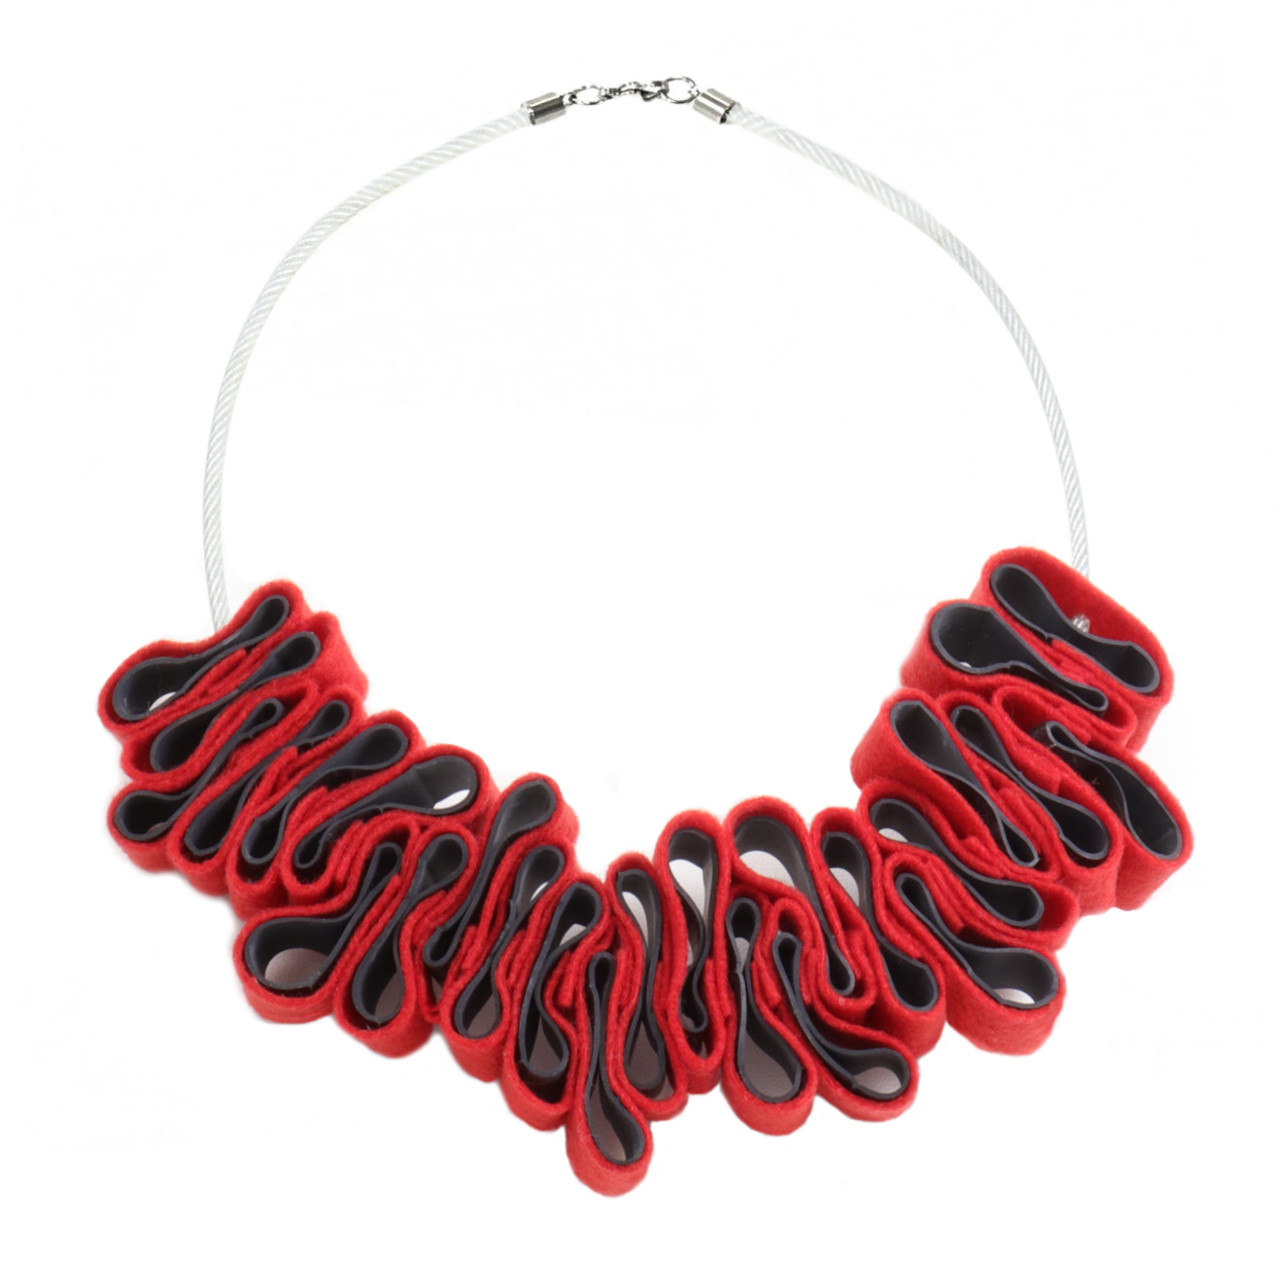 Red Felt and Rubber Ribbon Necklace - Detroit Institute of Arts Museum Shop